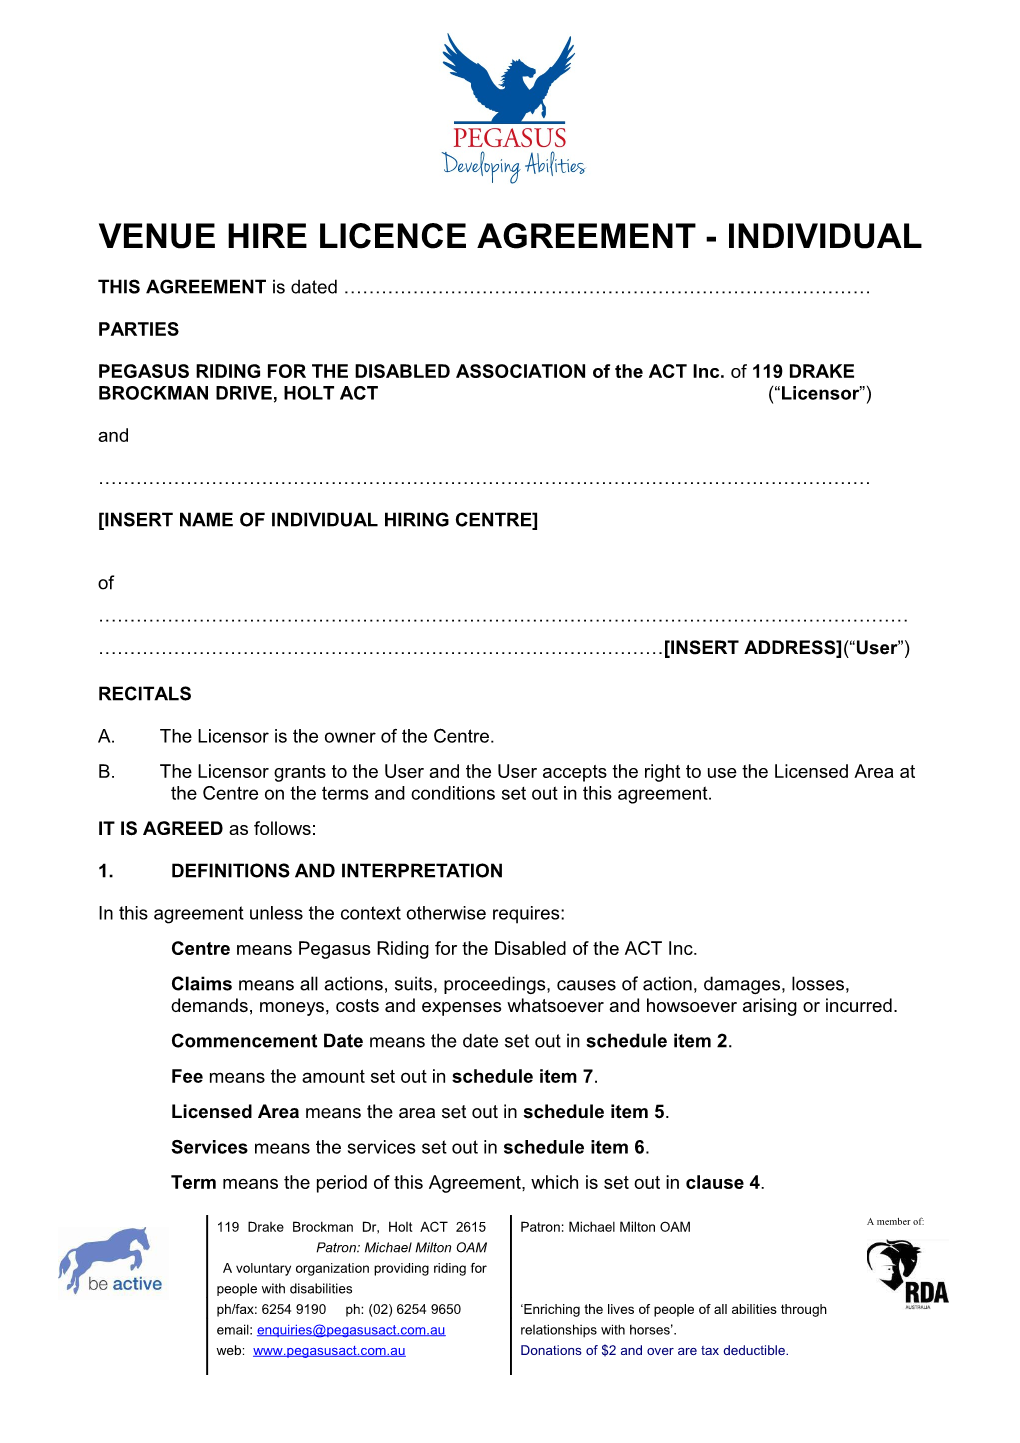 Venue Hire Licence Agreement - Individual